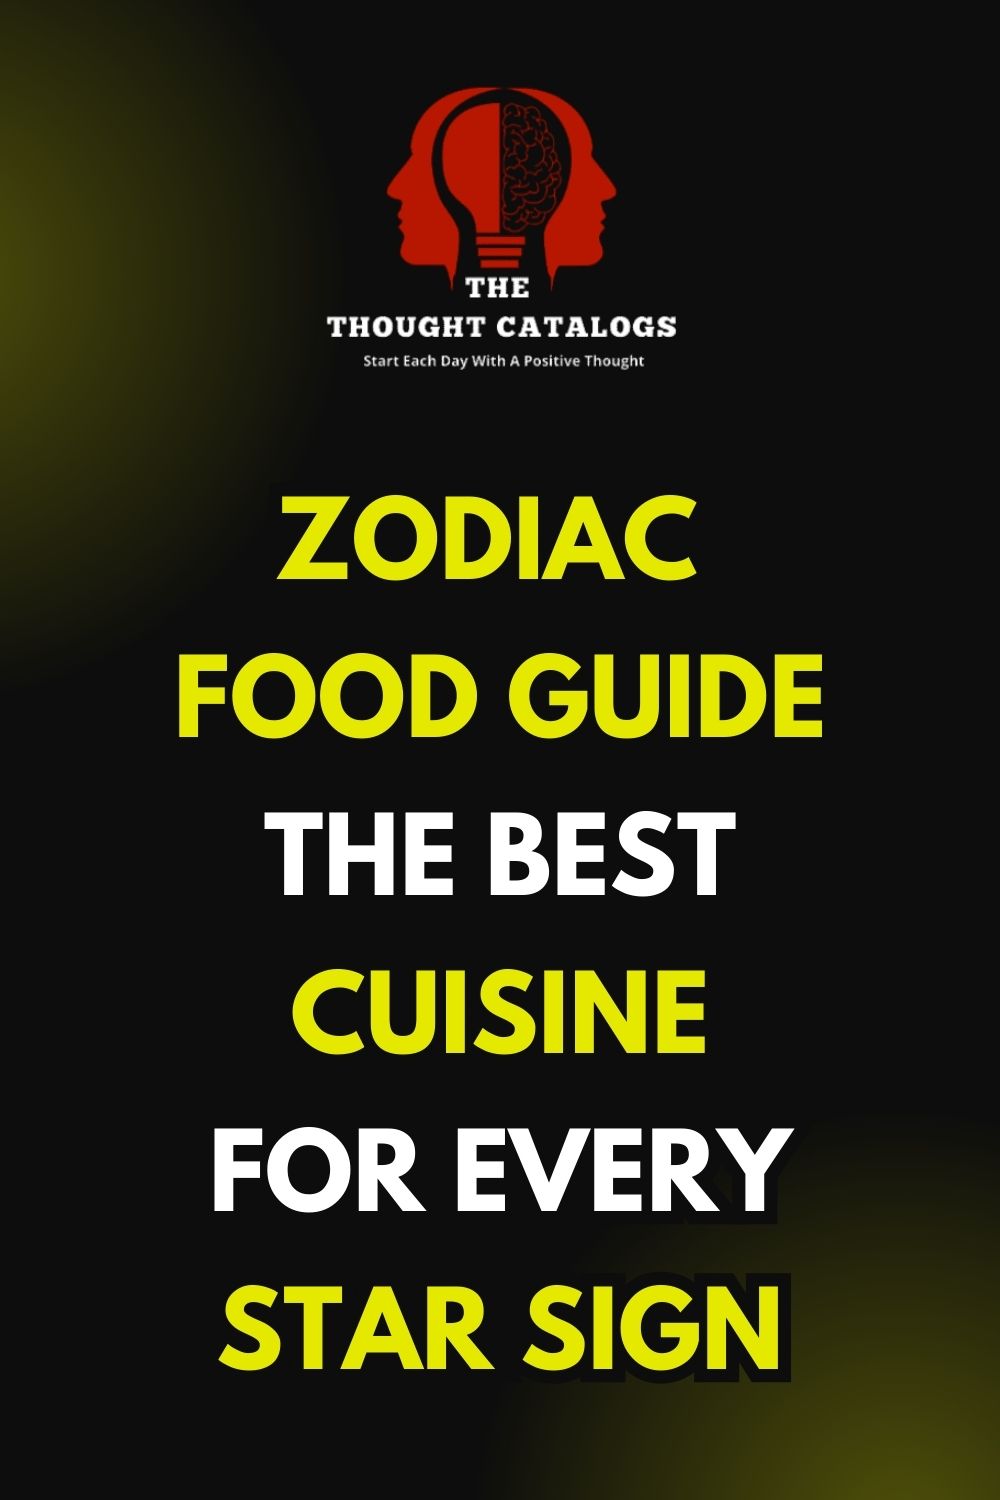 Zodiac Food Guide: The Best Cuisine for Every Star Sign